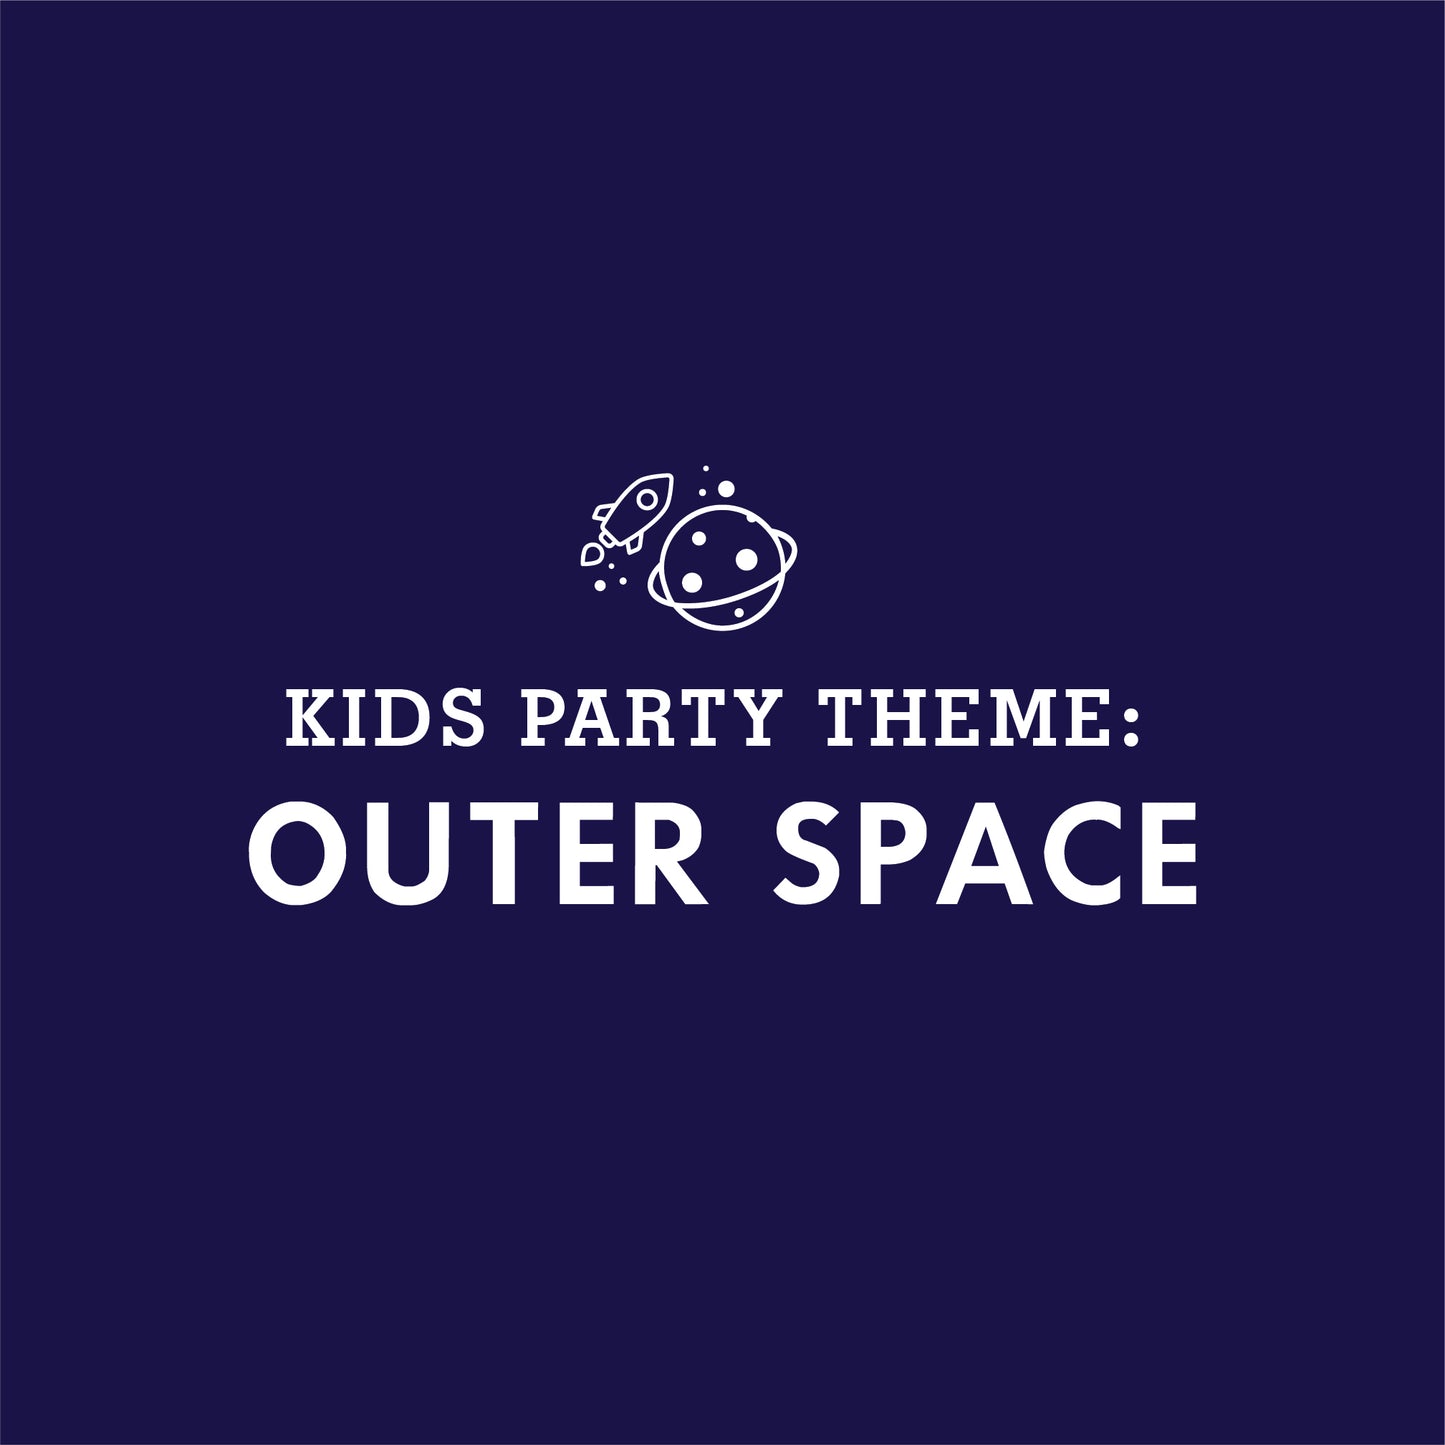 KIDS PARTY THEME: Outer Space